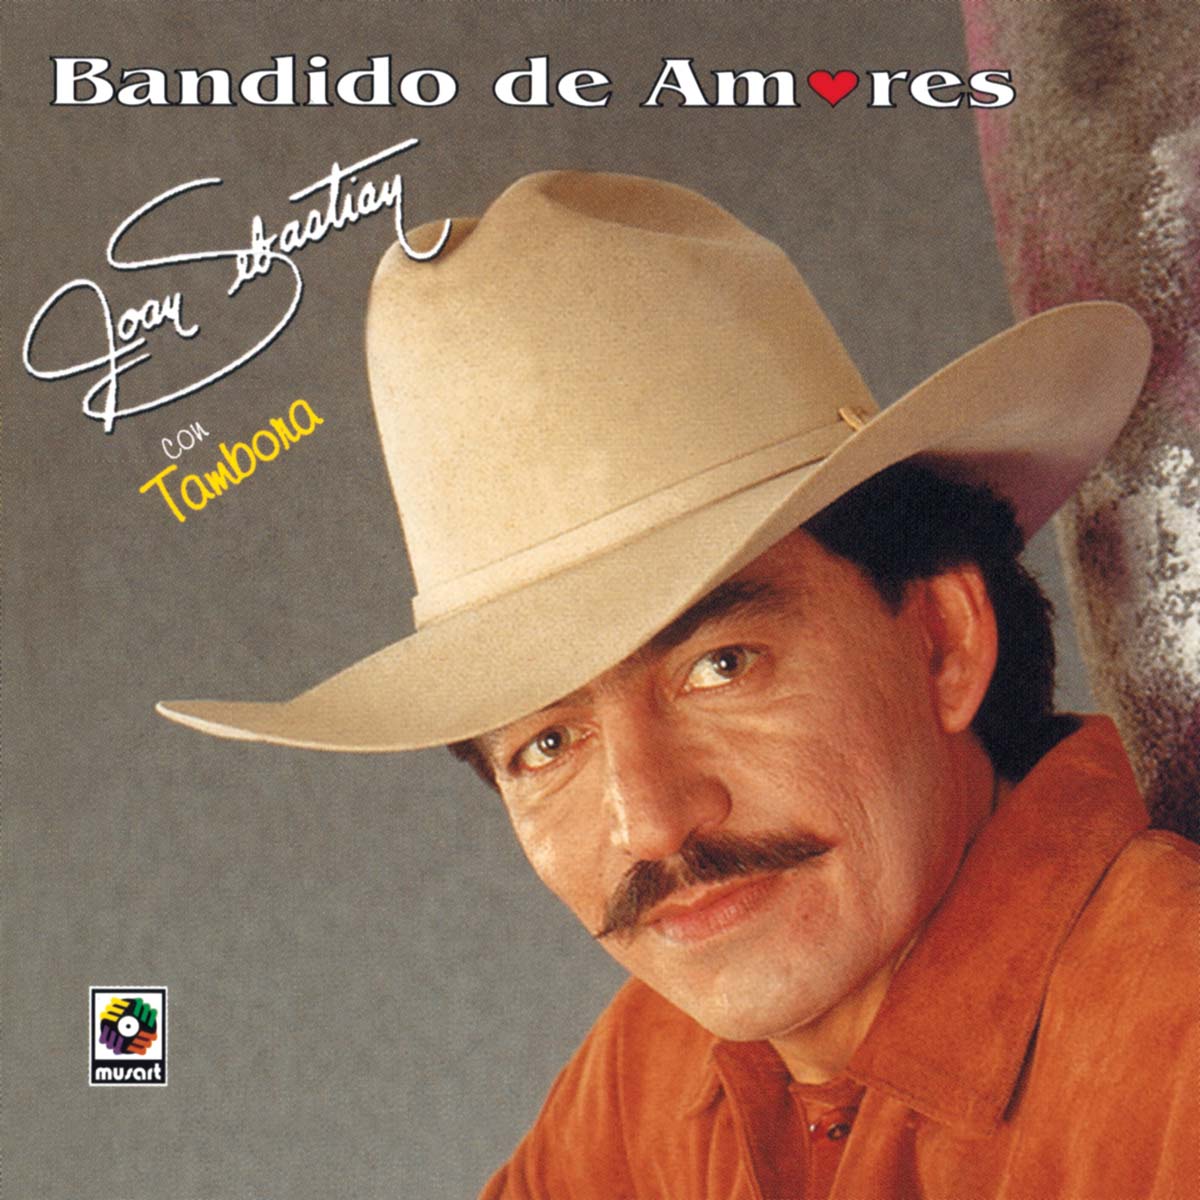 Featured Image for “Bandido De Amores”